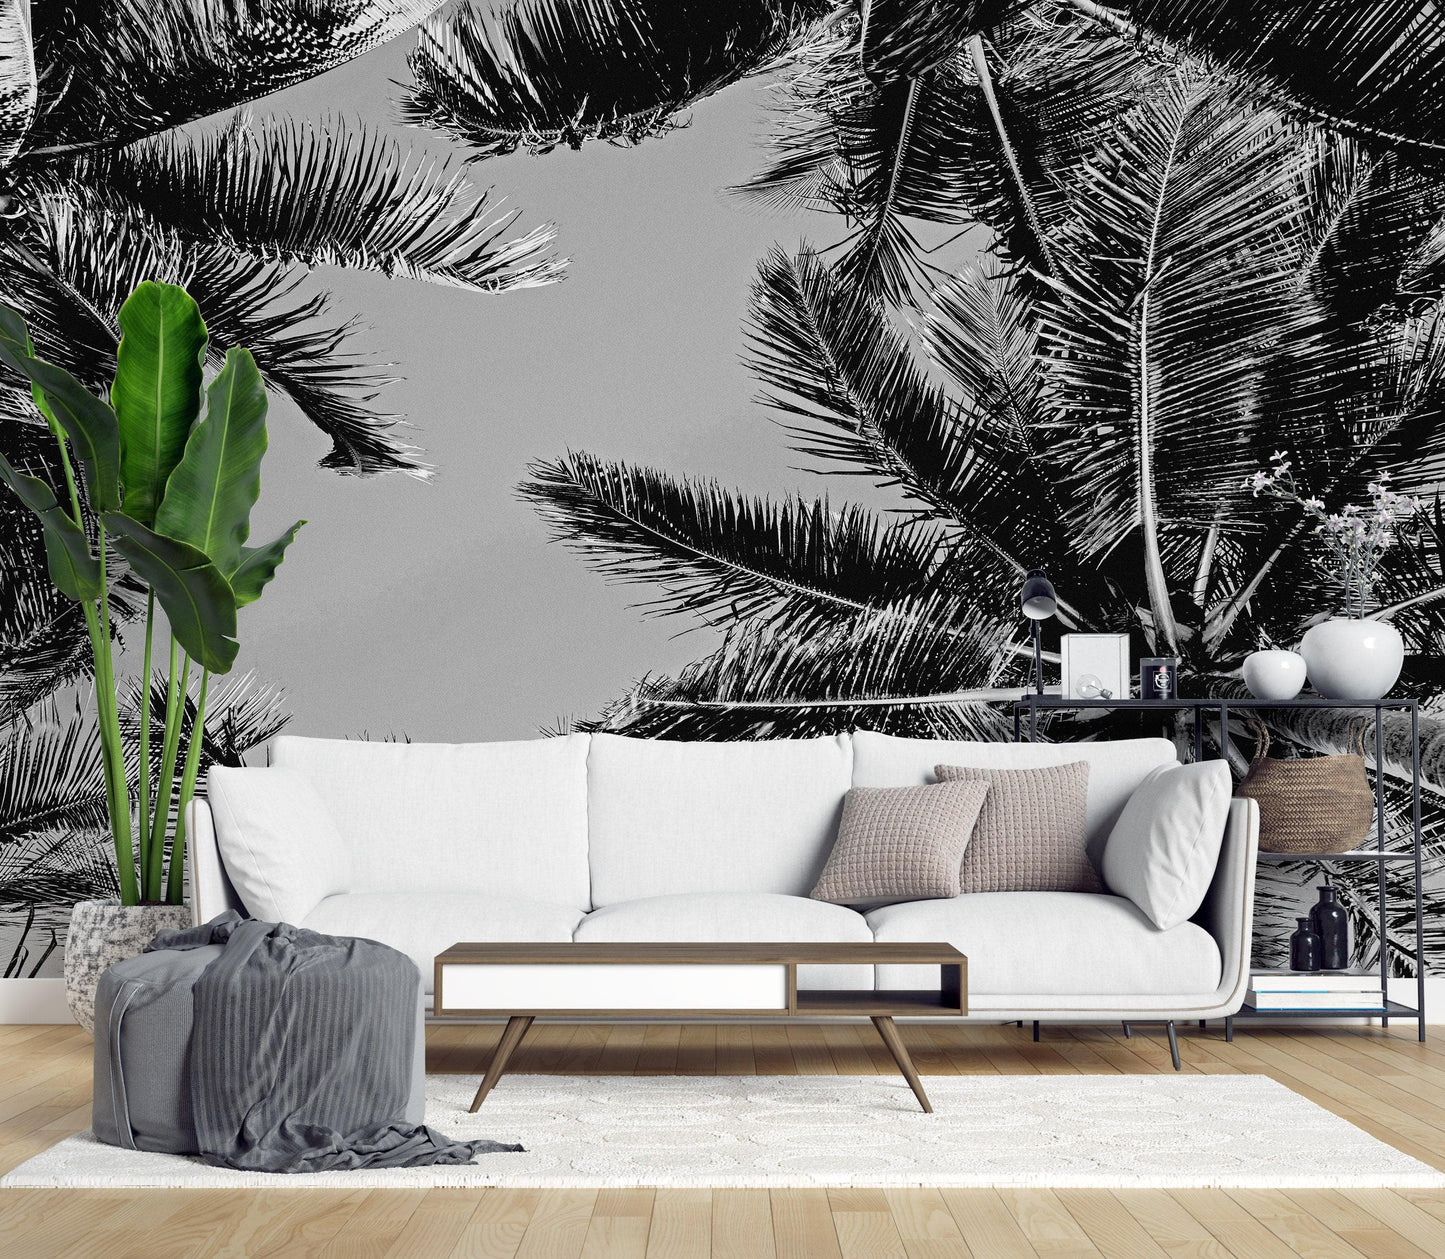 Black and White Tropical Palm Tree Mural. Vintage Summer Vibe. #6315